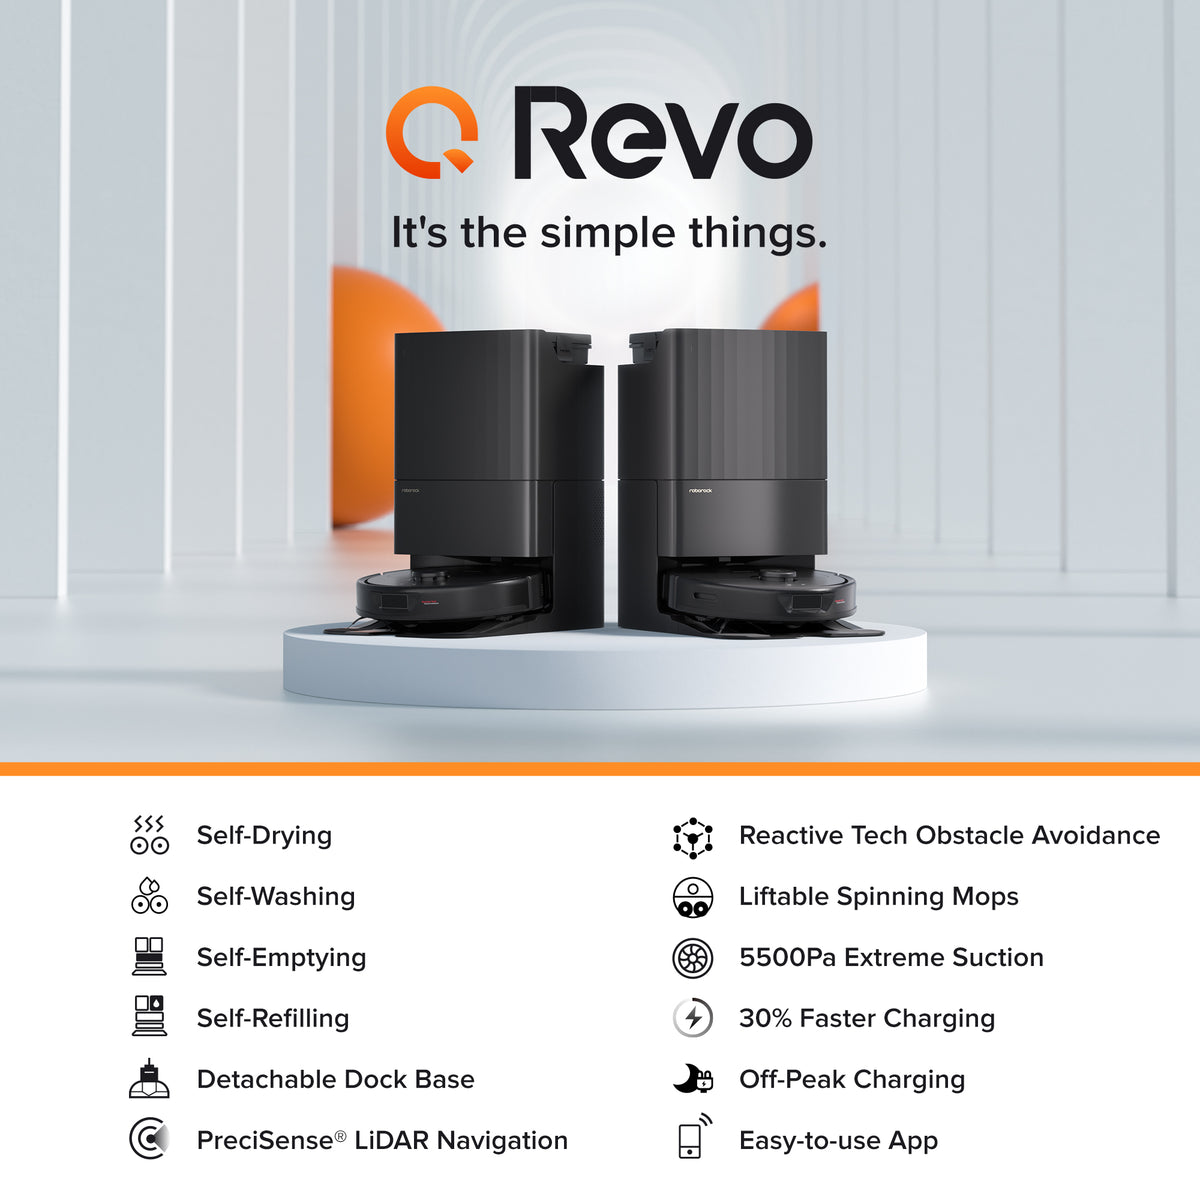 The PERFECT blend of Price and Features! Roborock Q Revo 